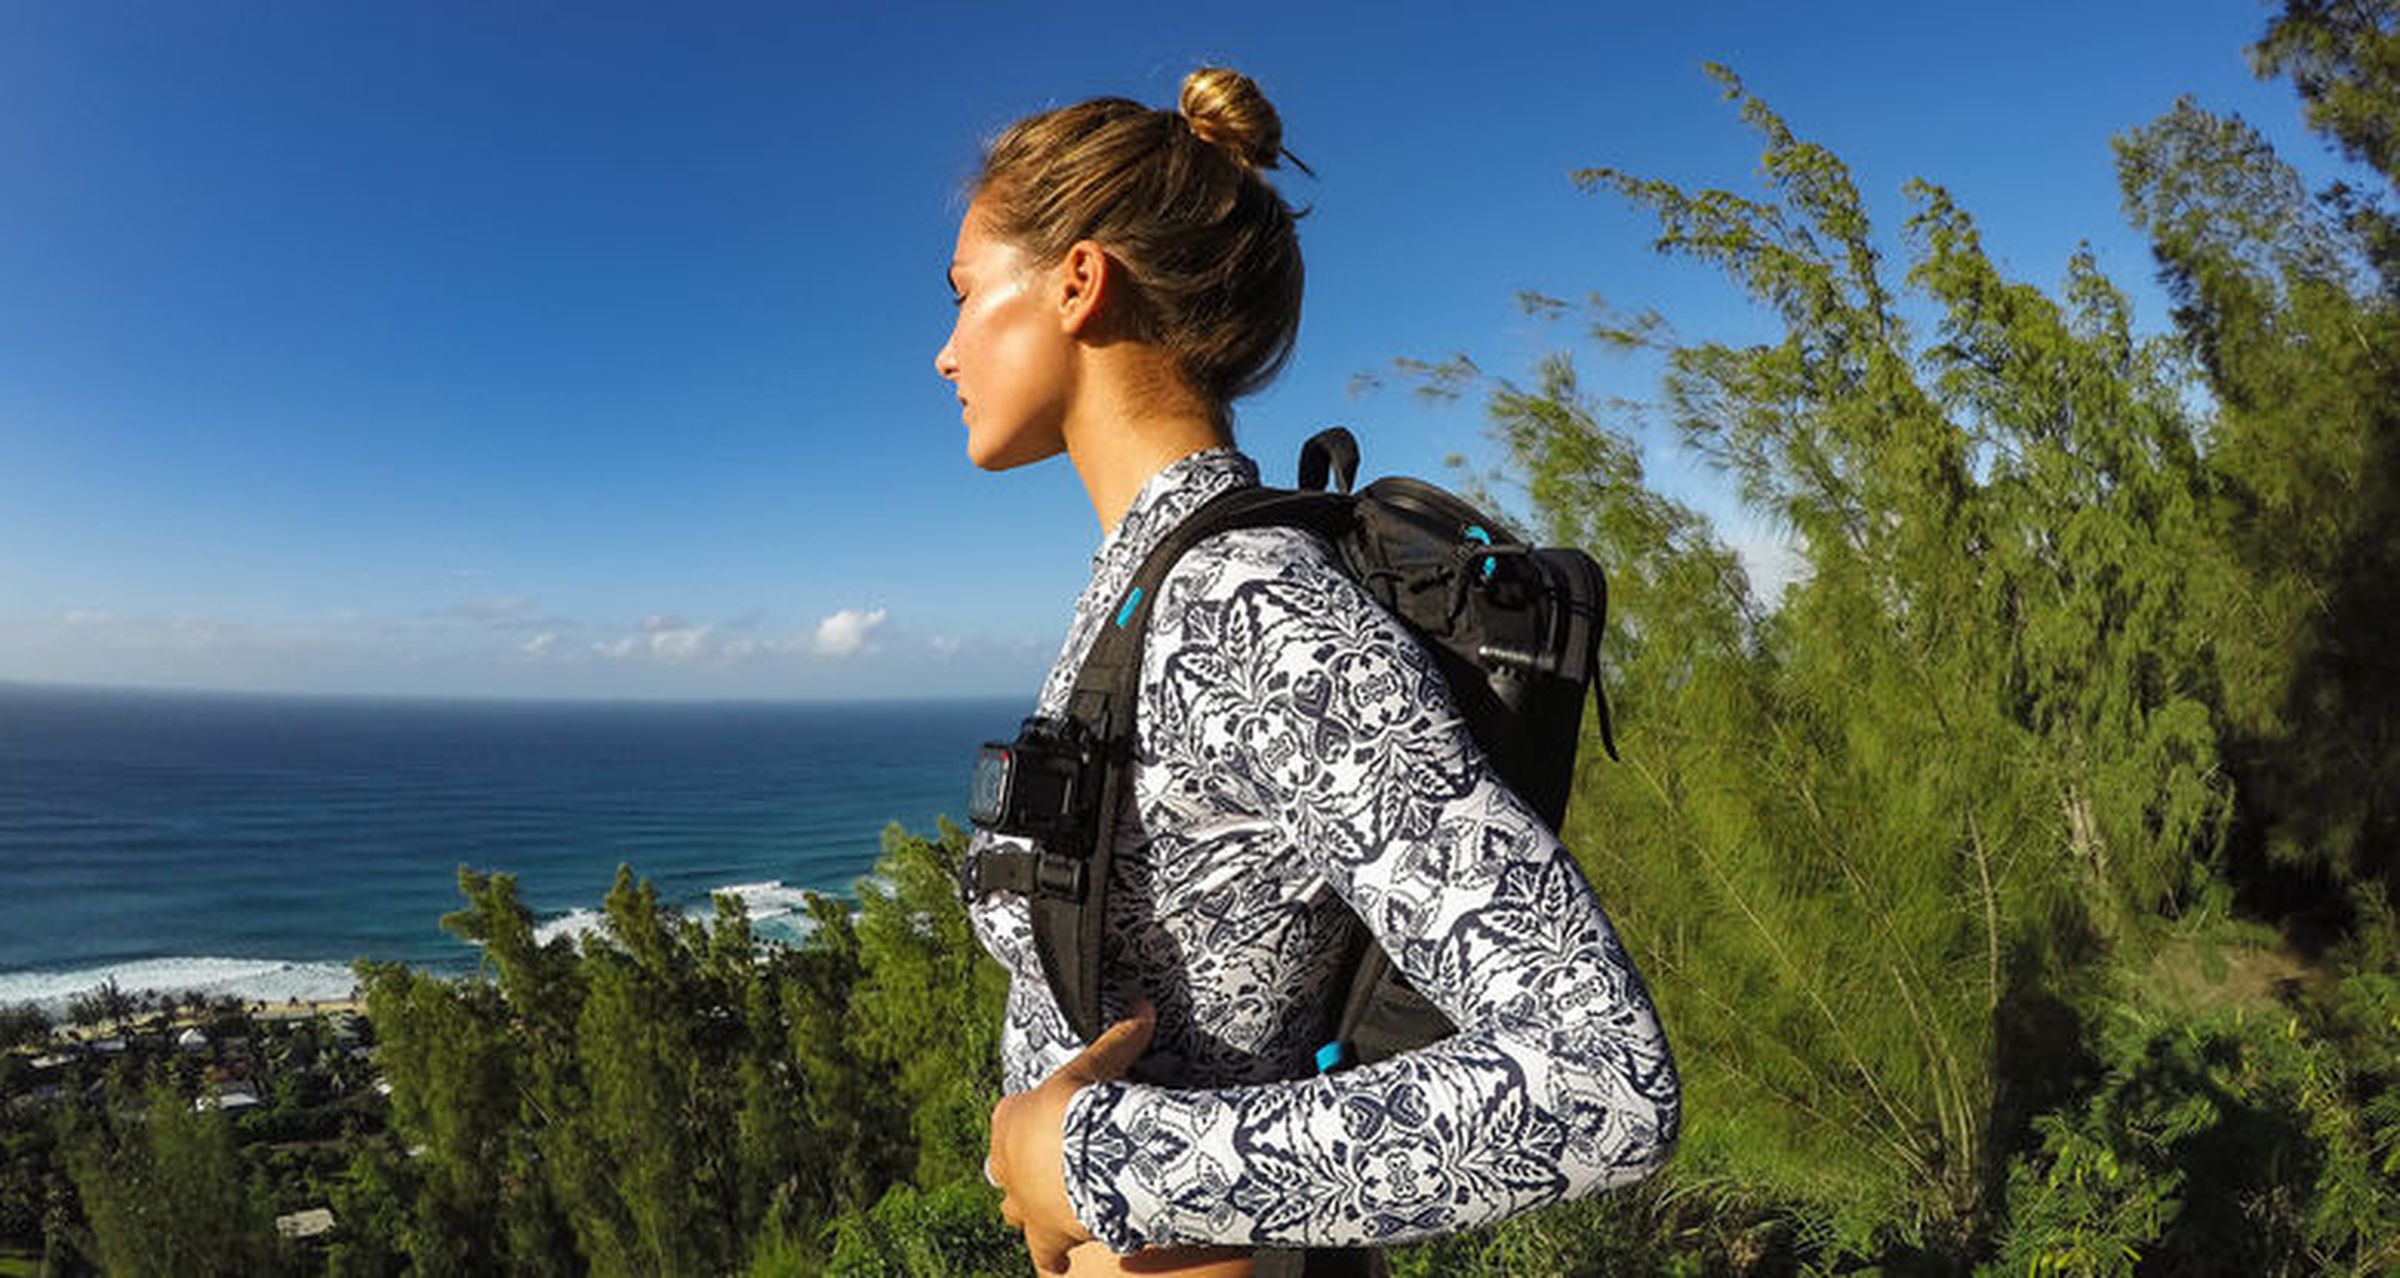 GoPro released a new backpack, the Seeker